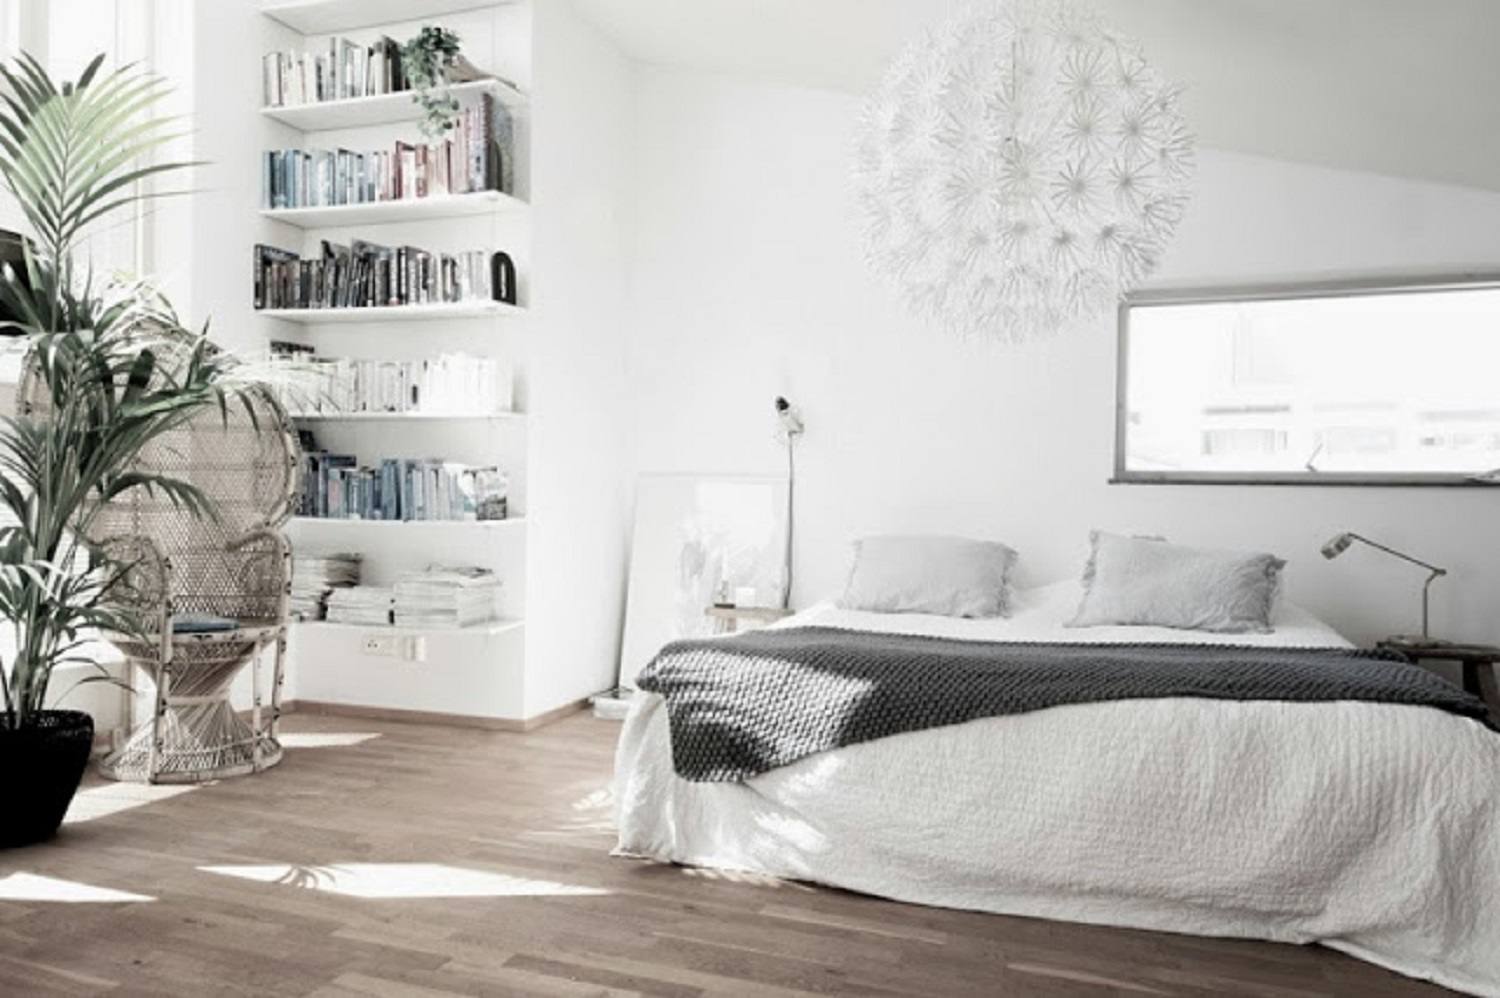 Using White in a Scandinavian Interior Style Bedroom